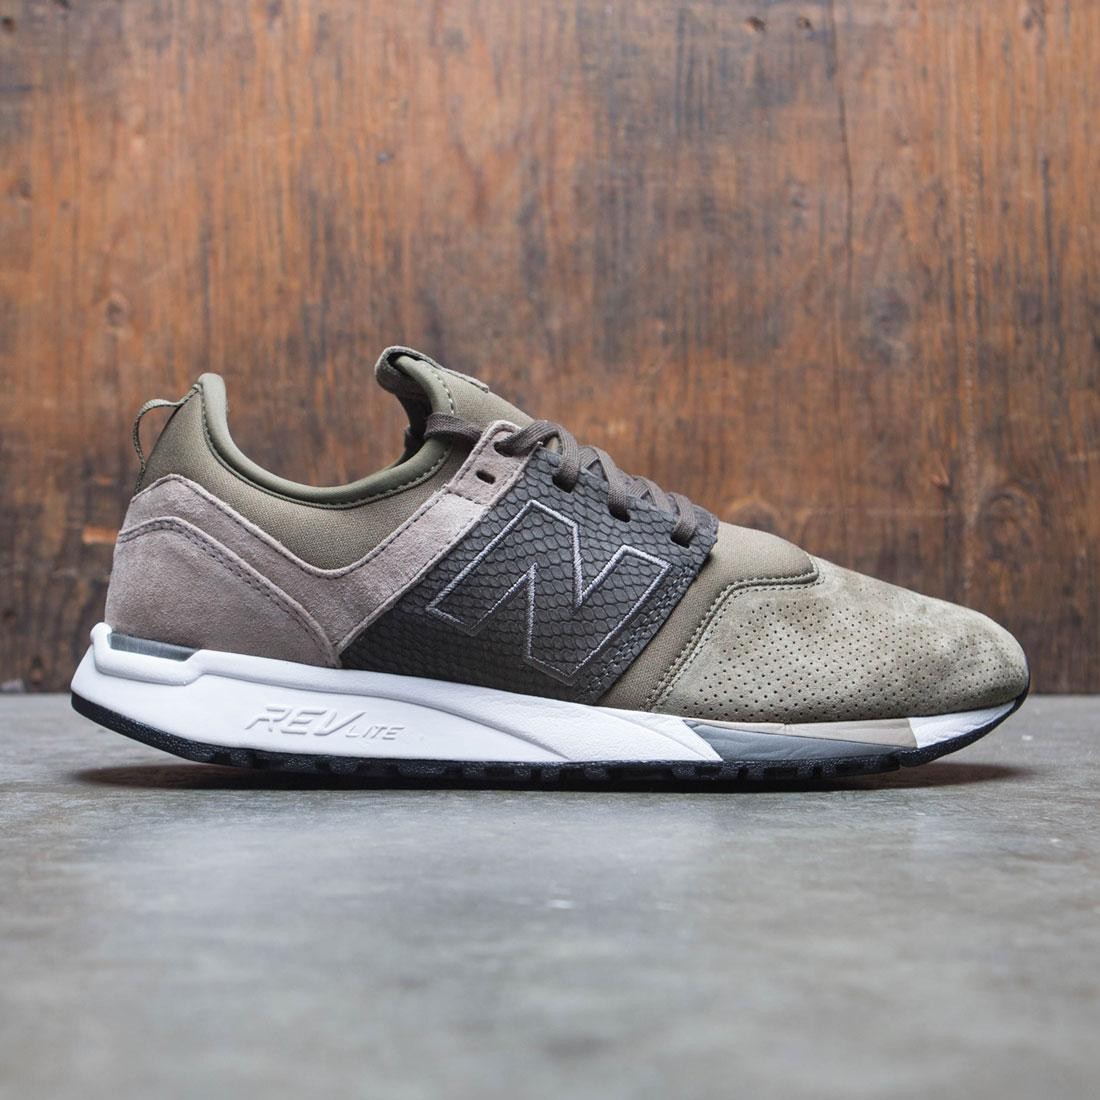 New Balance Men 247 Luxe MRL247RG olive military green beige